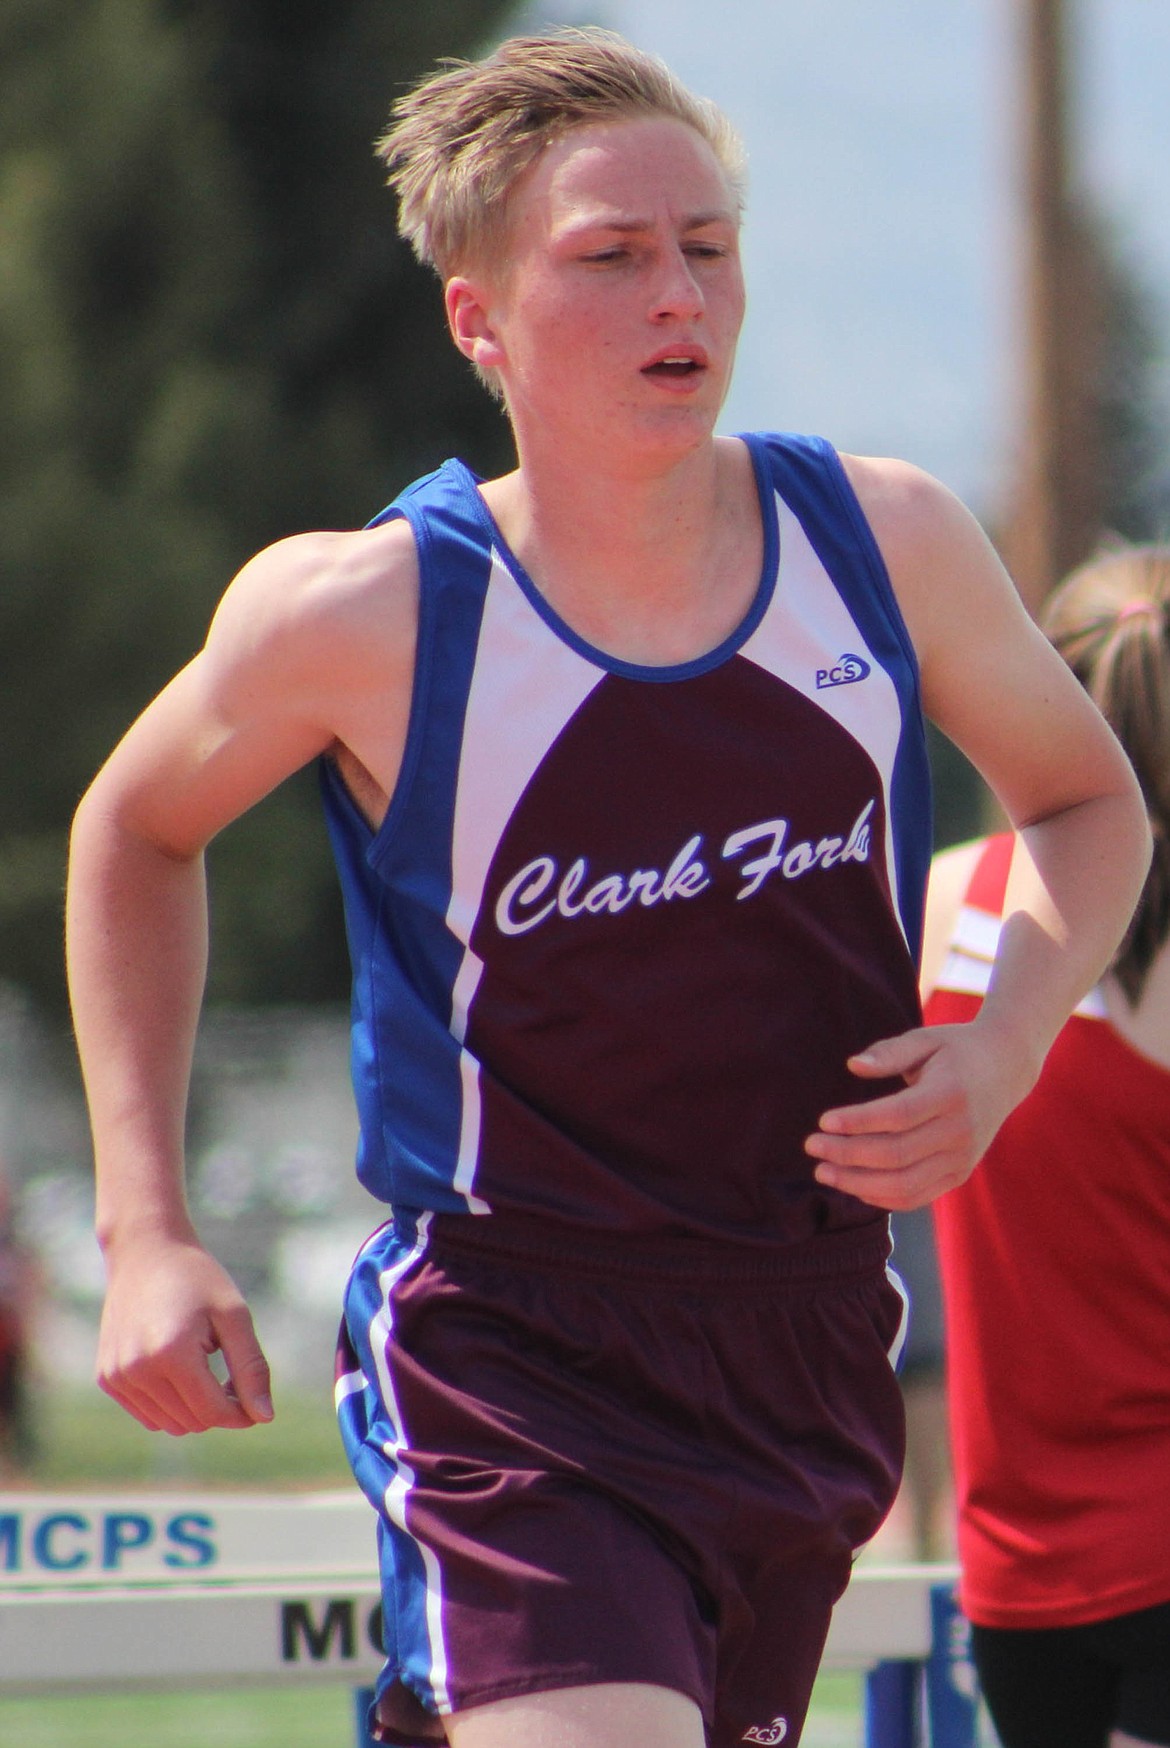 MADS GROENLUNC runs in the 1600 meters at Big Sky High School on Saturday, May 4. He placed 34th with a time of 5:49:00. (Maggie Dresser/Mineral Independent)